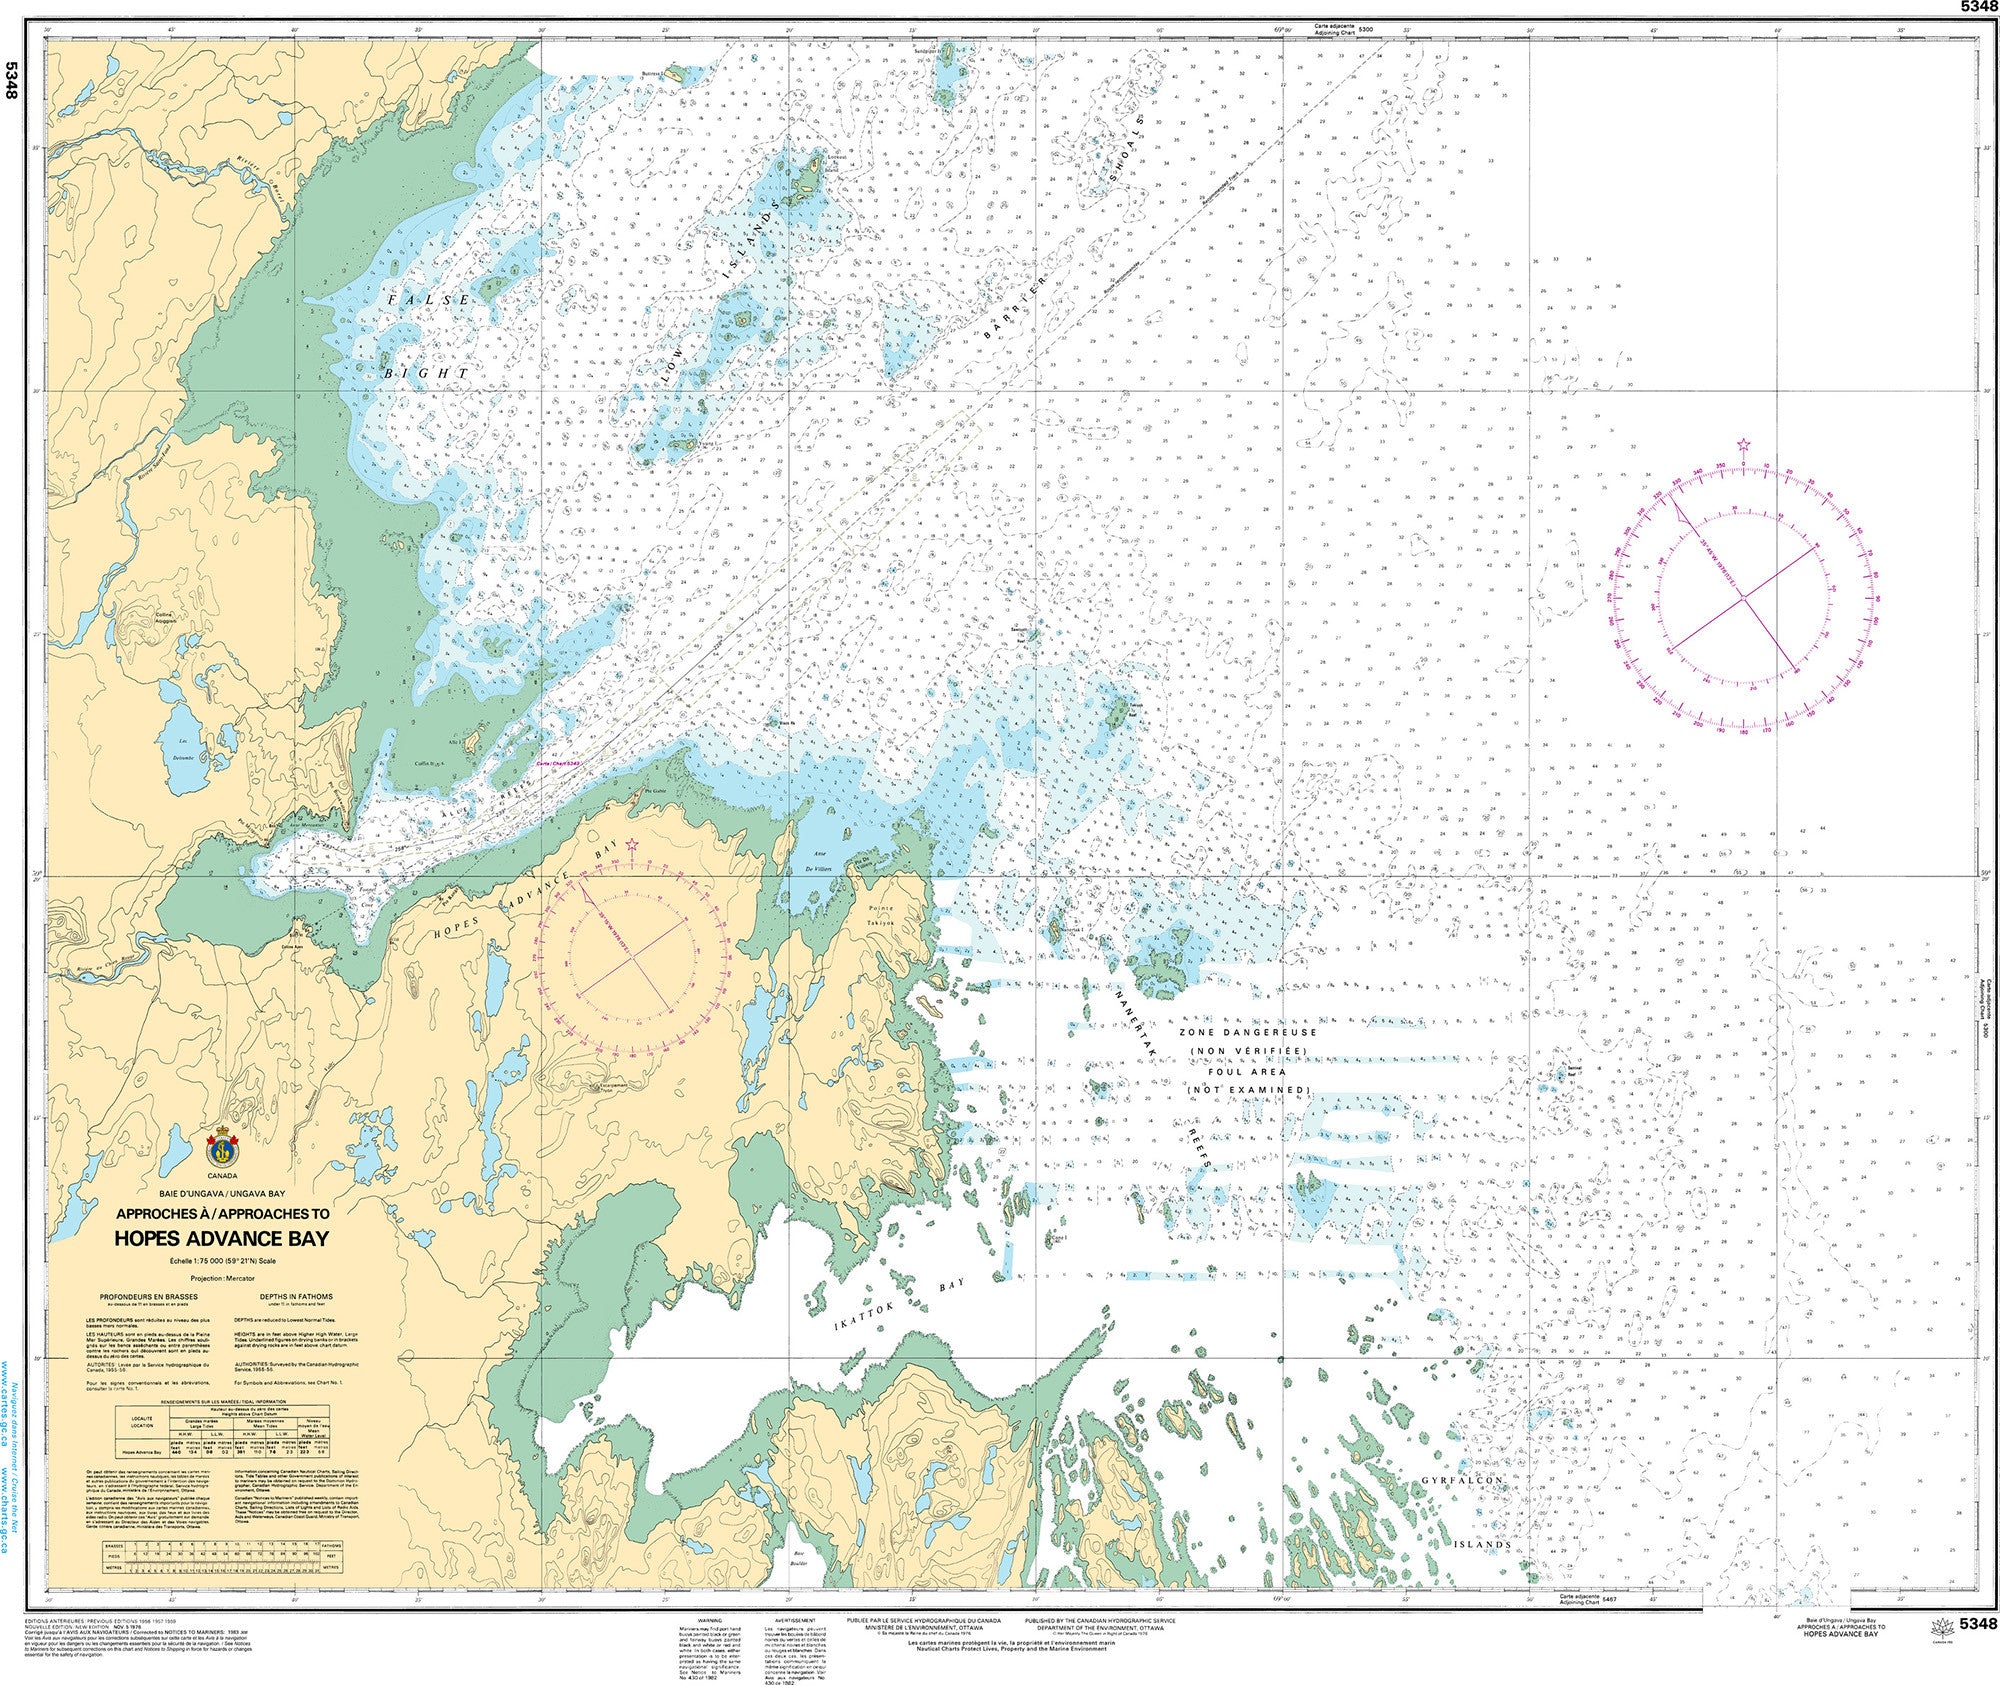 Canadian Hydrographic Service Nautical Chart CHS5348: Approches à/Approaches to Hopes Advance Bay